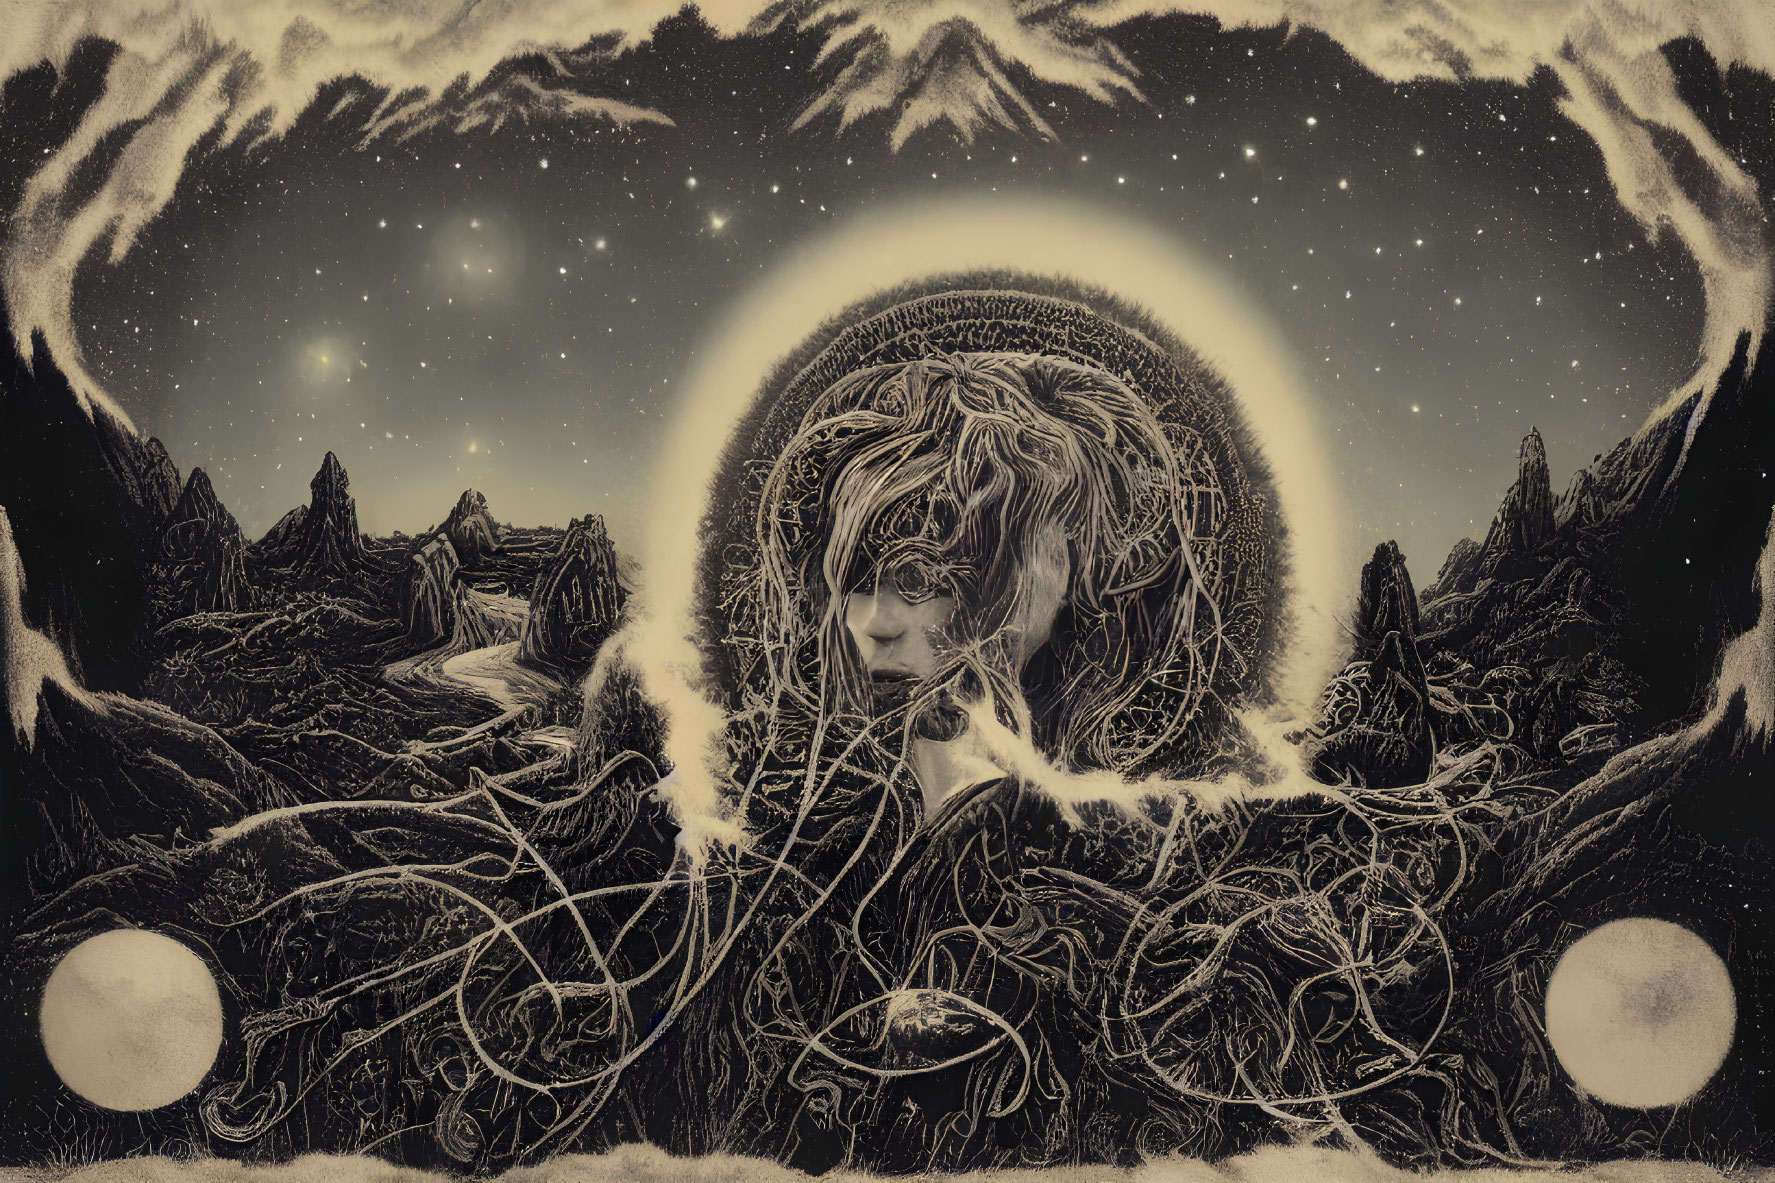 Monochromatic fantastical landscape with mountains and cosmic backdrop